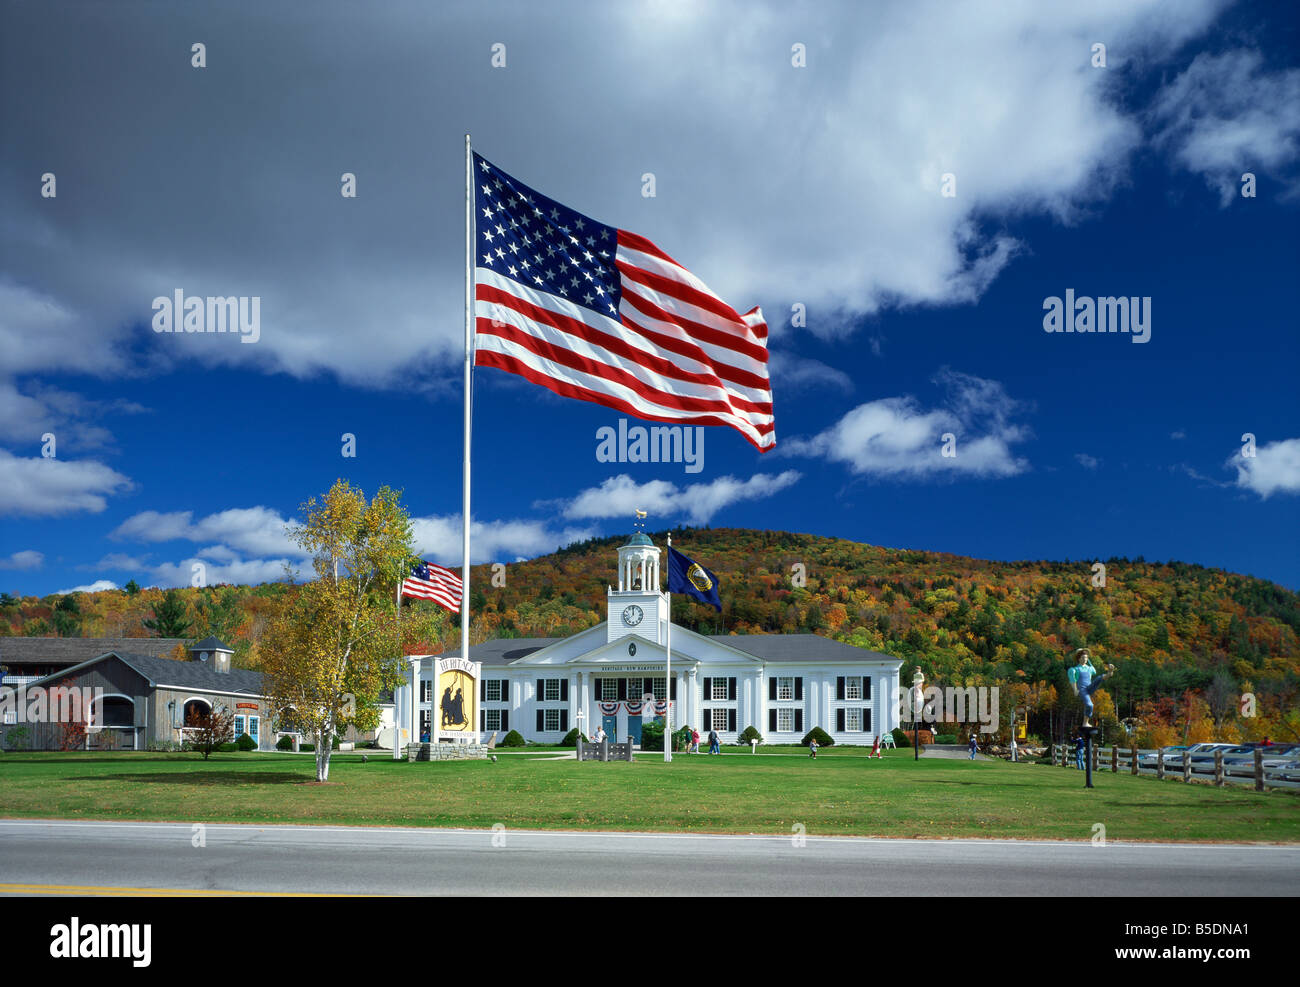 The Stars & Stripes in front of the Heritage Centre, White Mountain National Park, New Hampshire, New England, USA Stock Photo